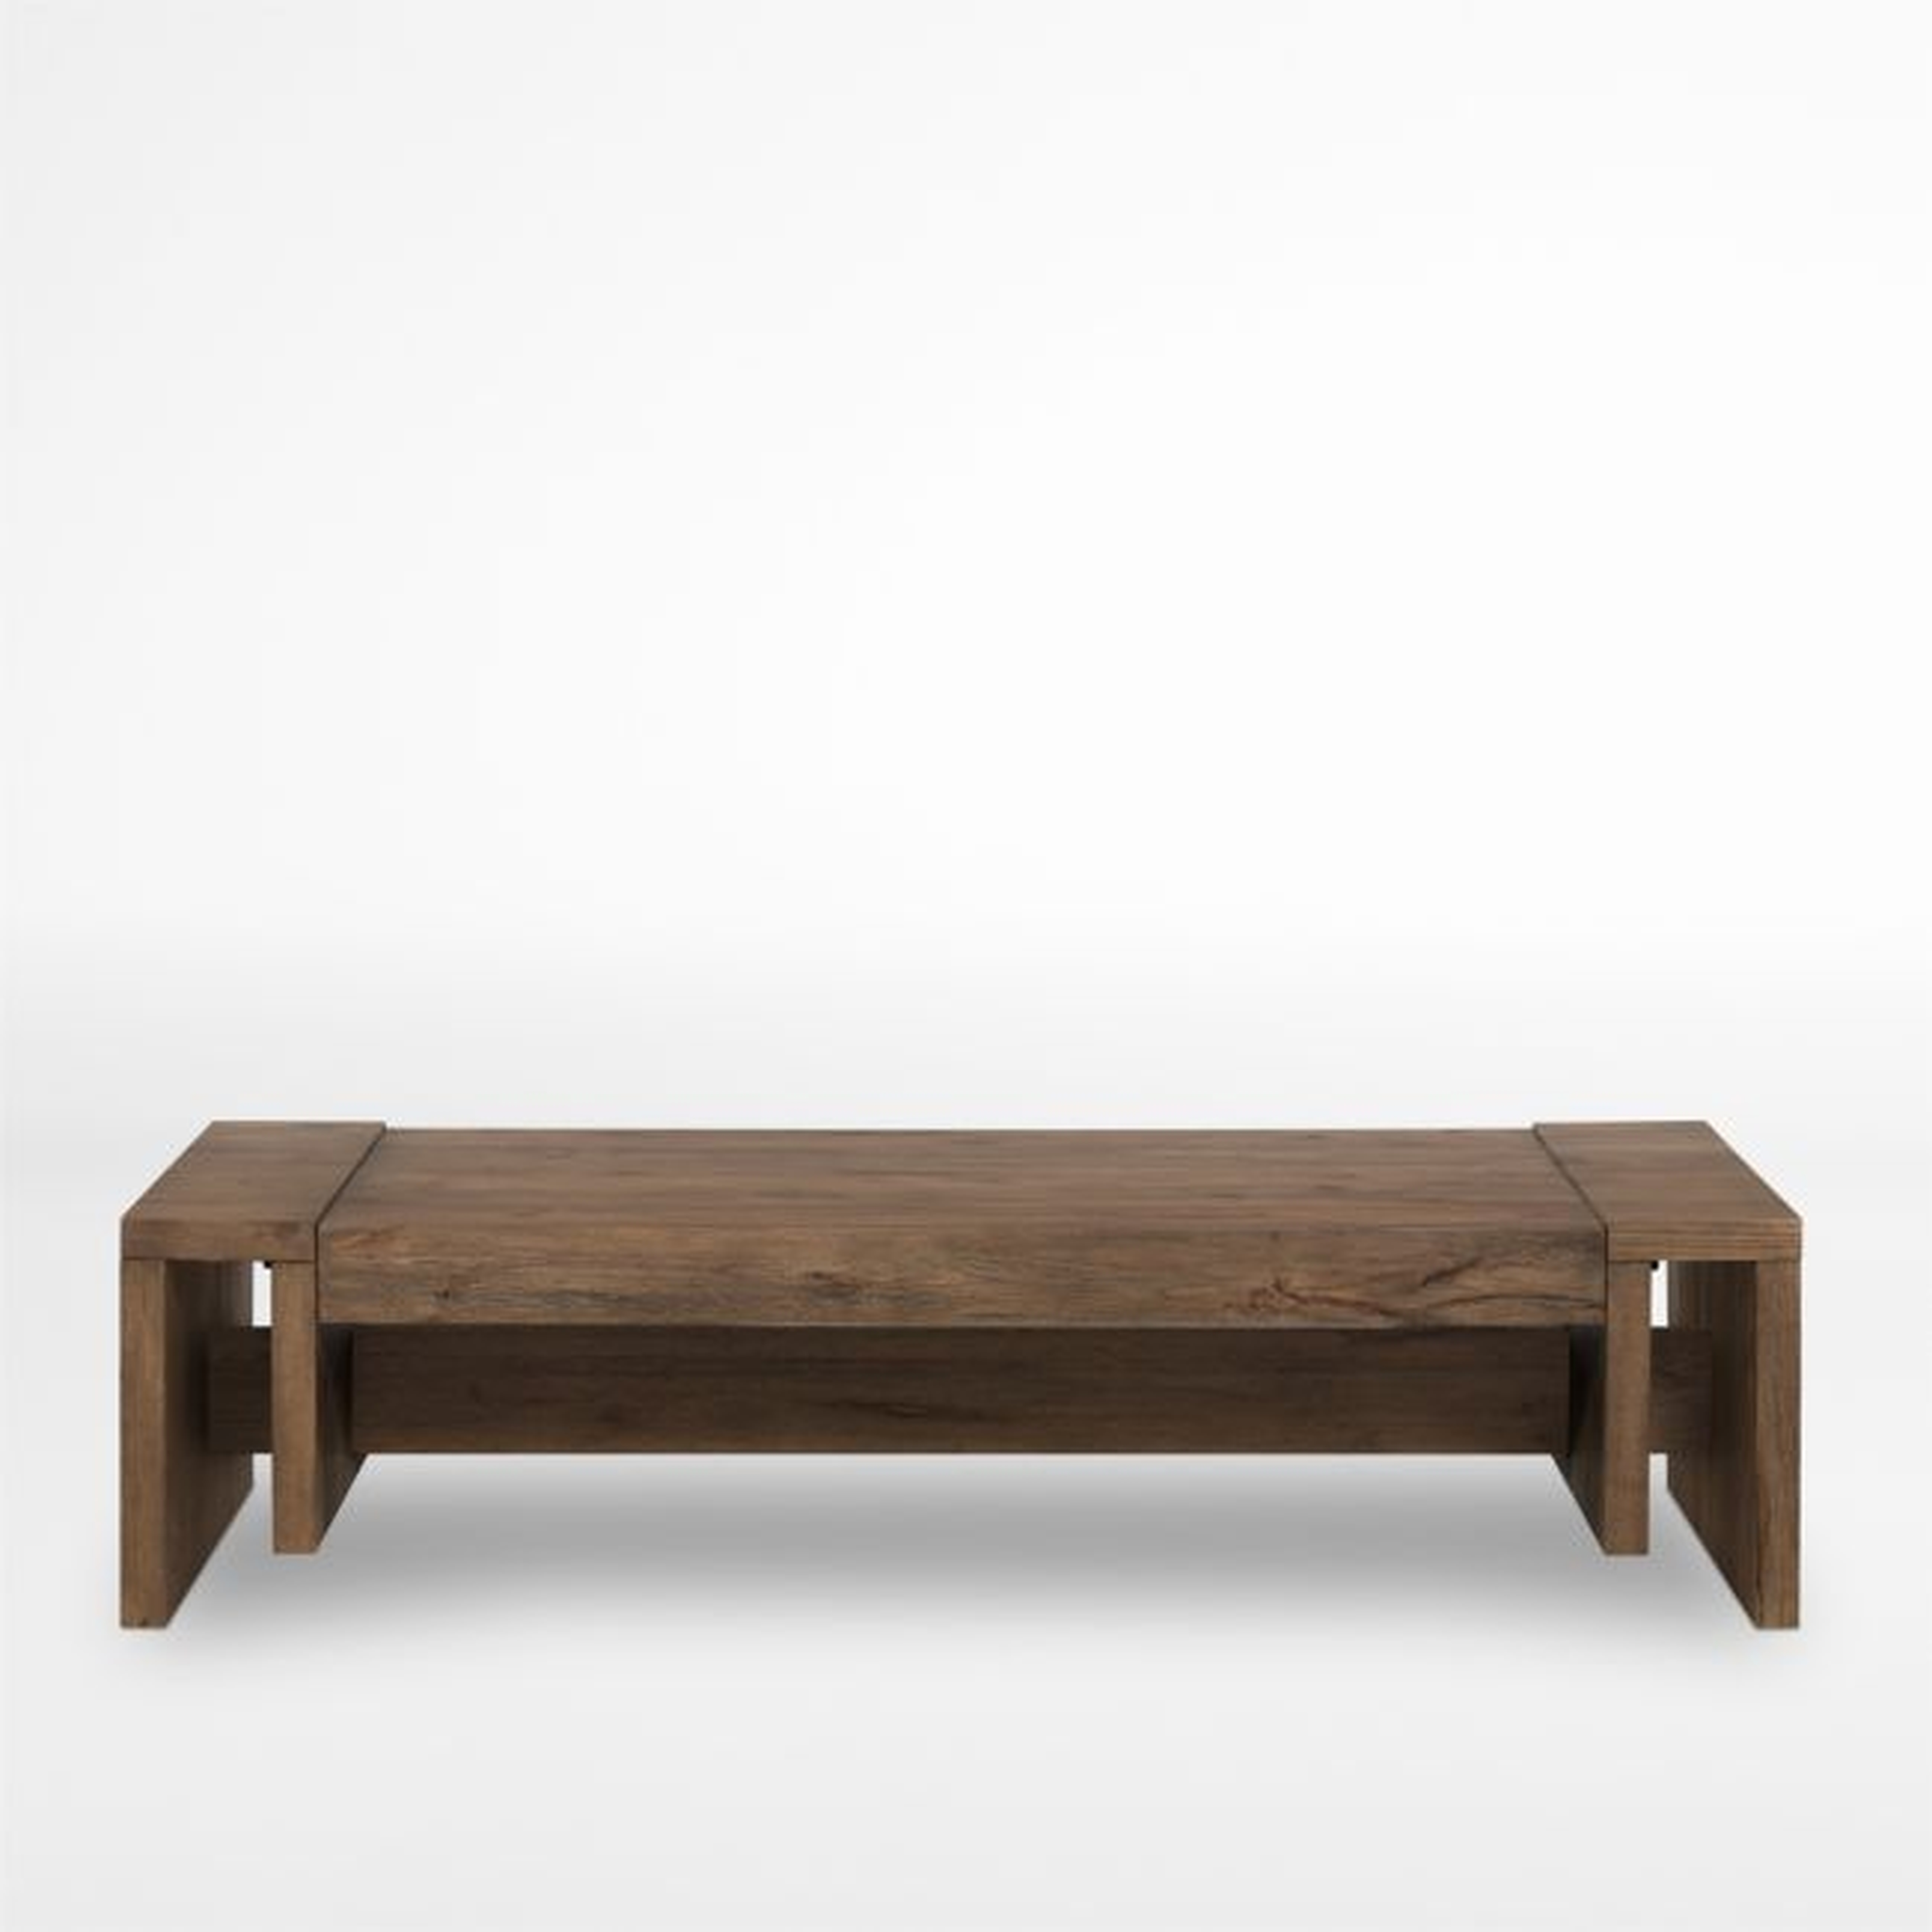 Cleave Brown Oak Wood 60" Rectangular Coffee Table - Crate and Barrel